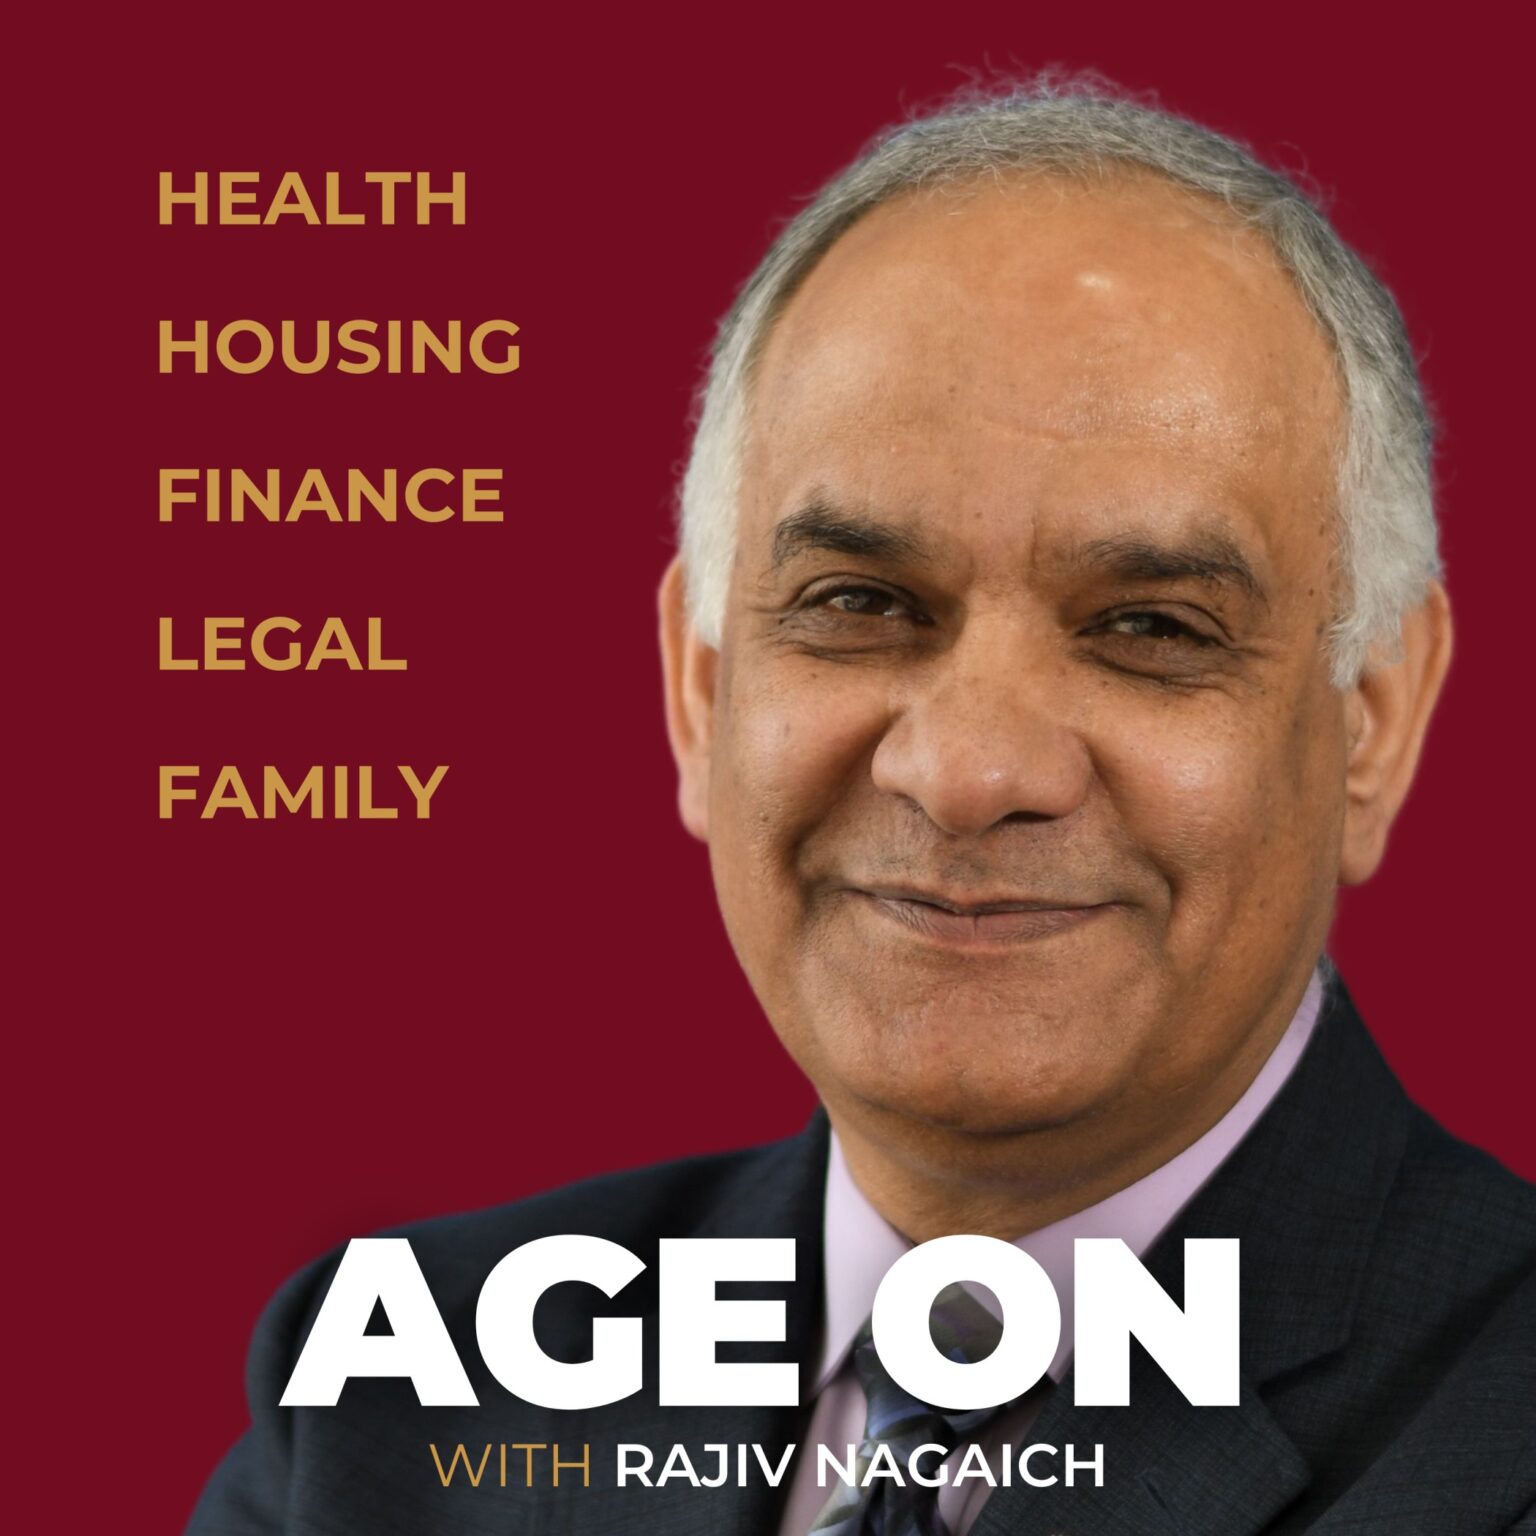 Rajiv Nagich is the architect of the LifePlanning approach to retirement planning and one of America’s most influential retirement planning thought leaders.